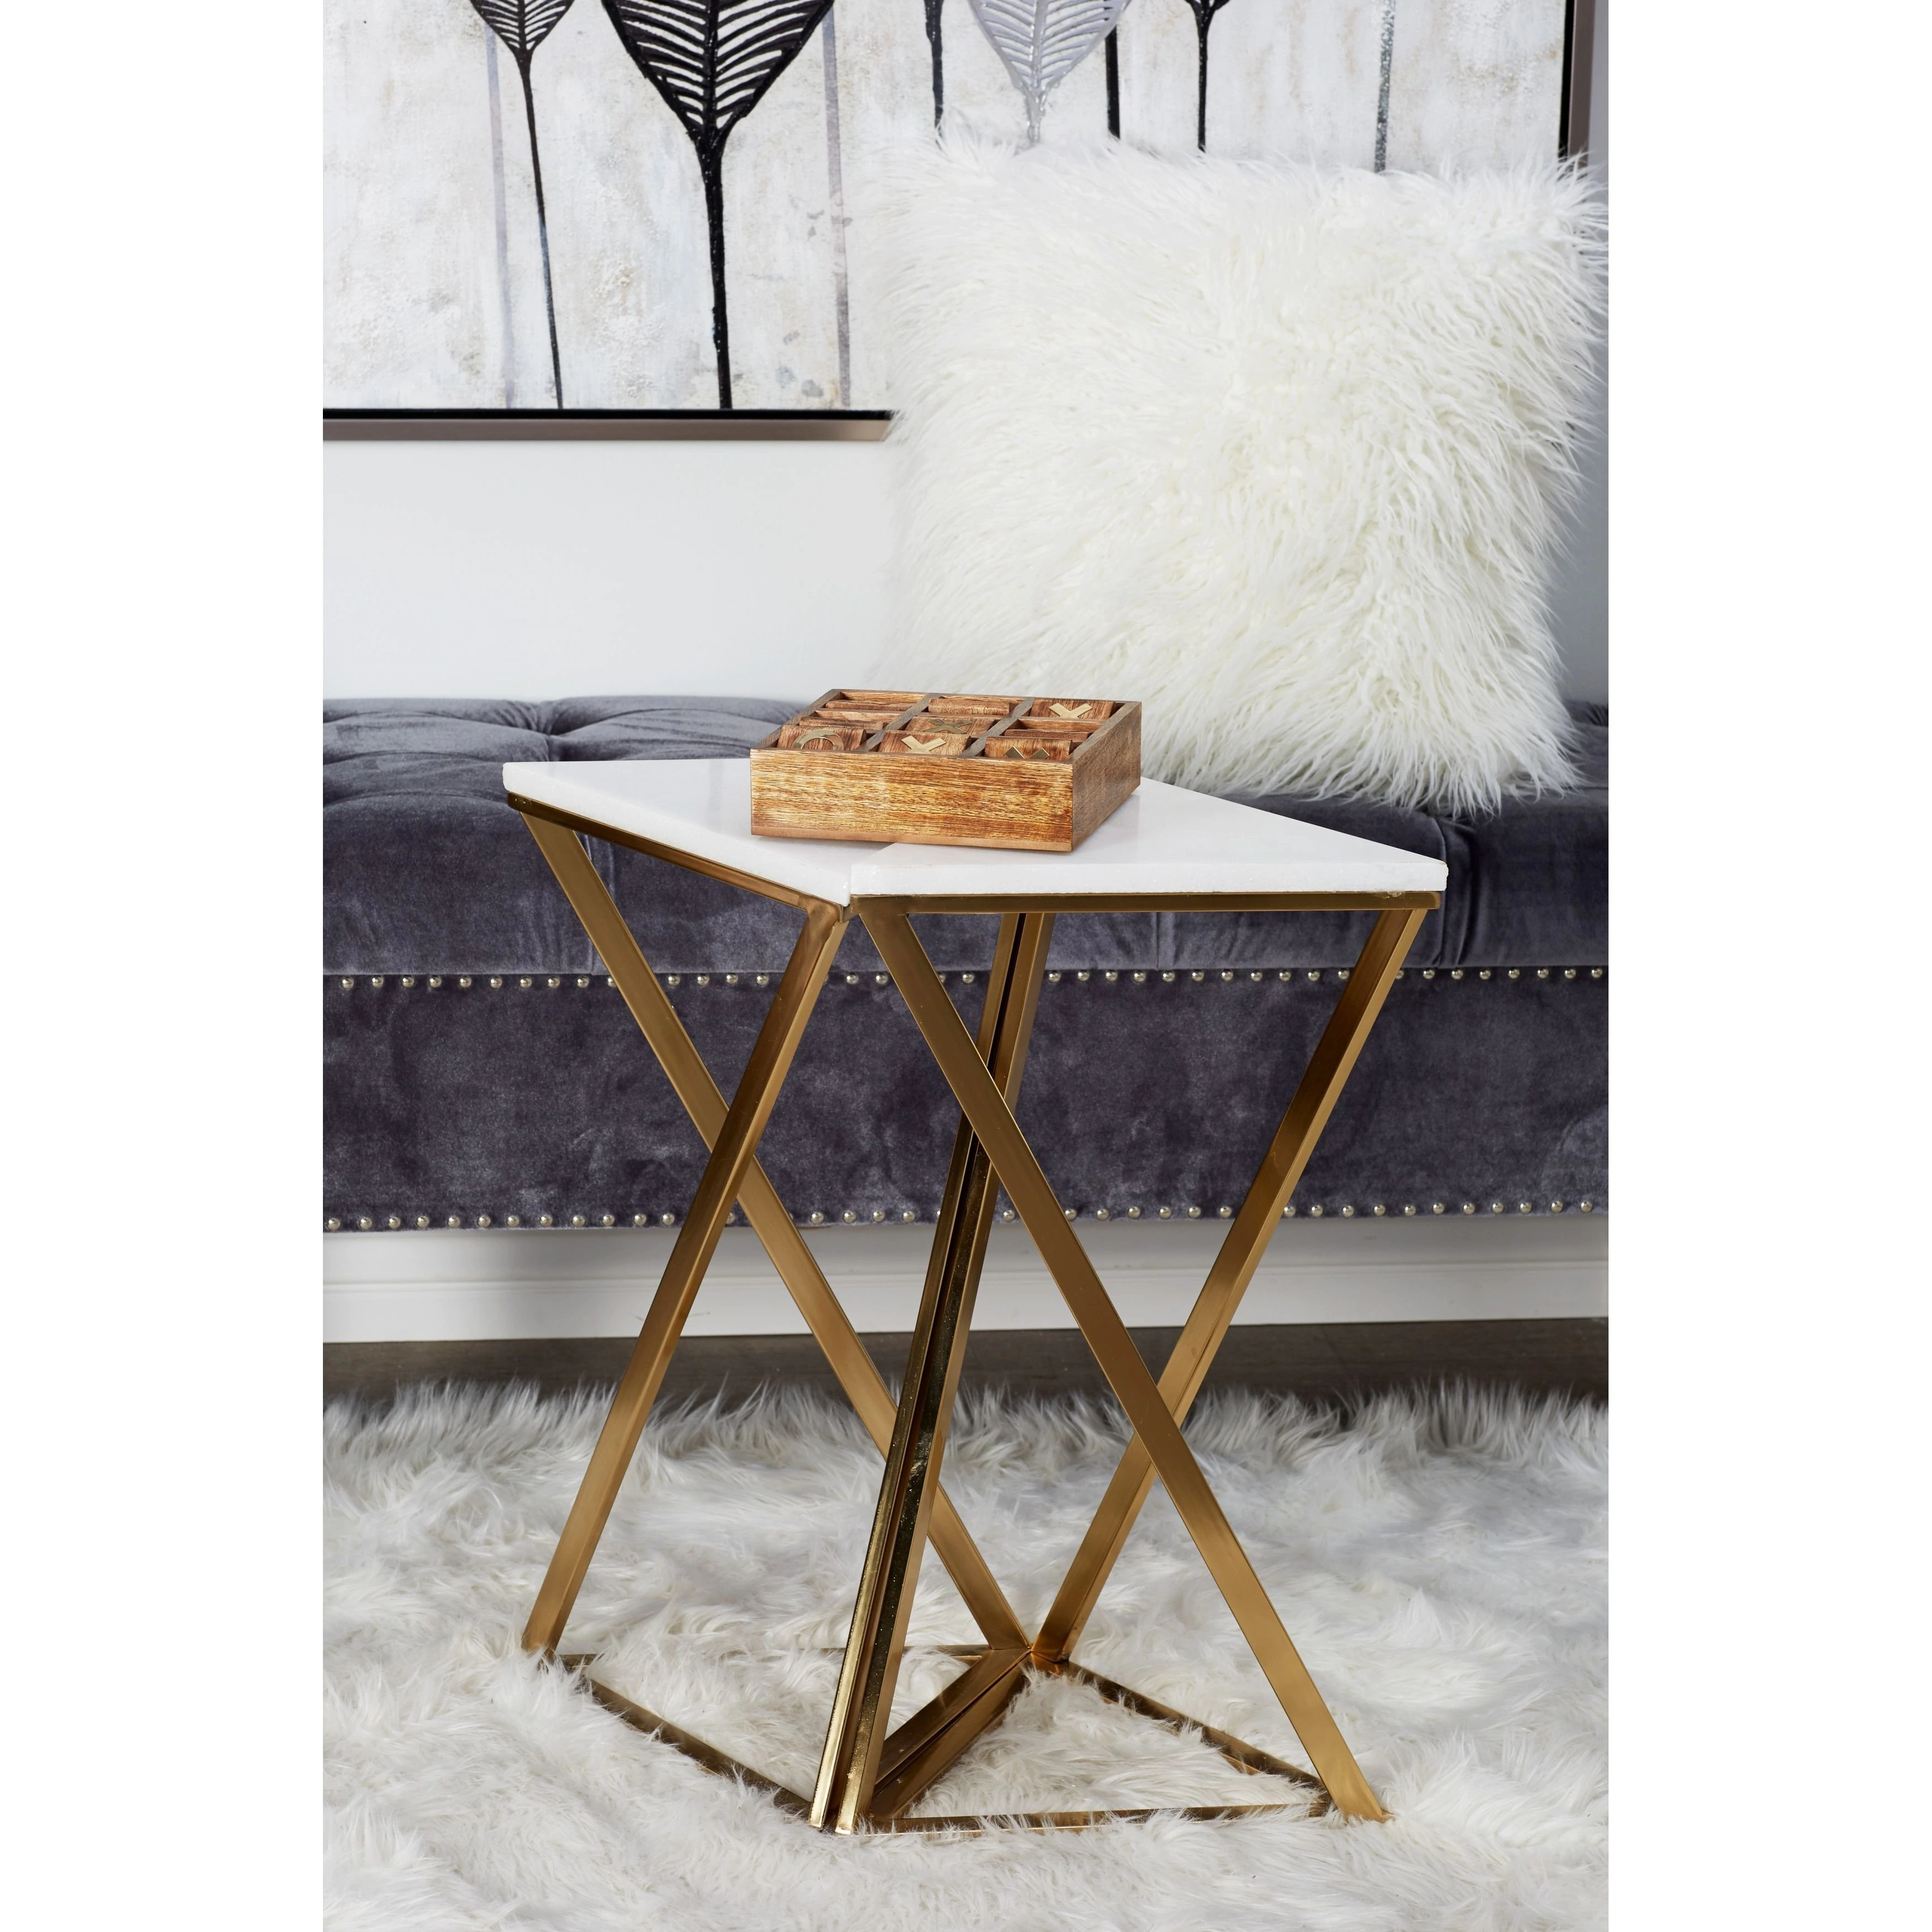 marble accent table limetennis set iron and hourglass tables signy drum free shipping today plastic garden chairs thin antique white side center decoration ideas living room sofa